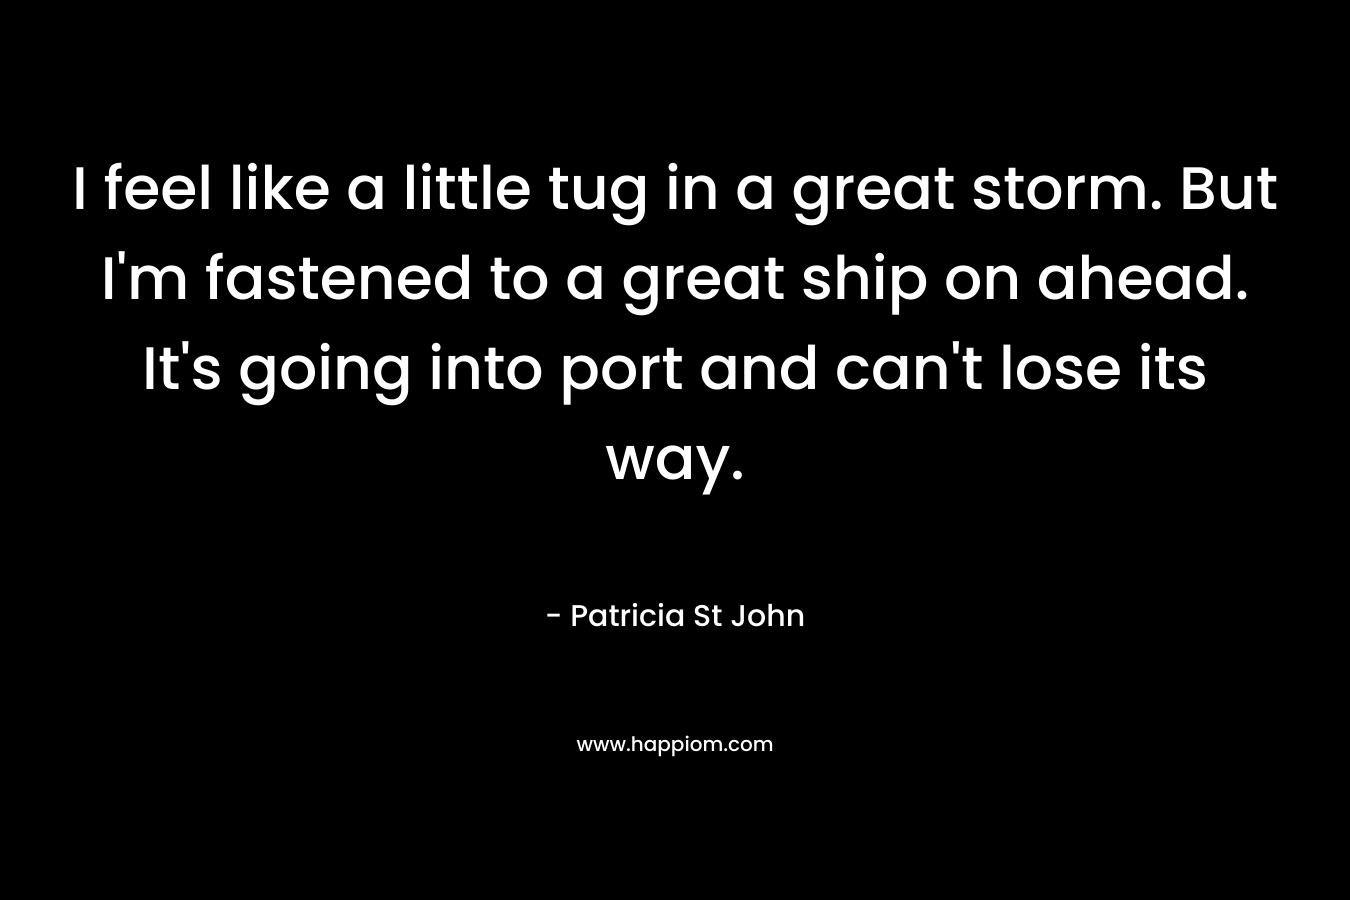 I feel like a little tug in a great storm. But I’m fastened to a great ship on ahead. It’s going into port and can’t lose its way. – Patricia St John